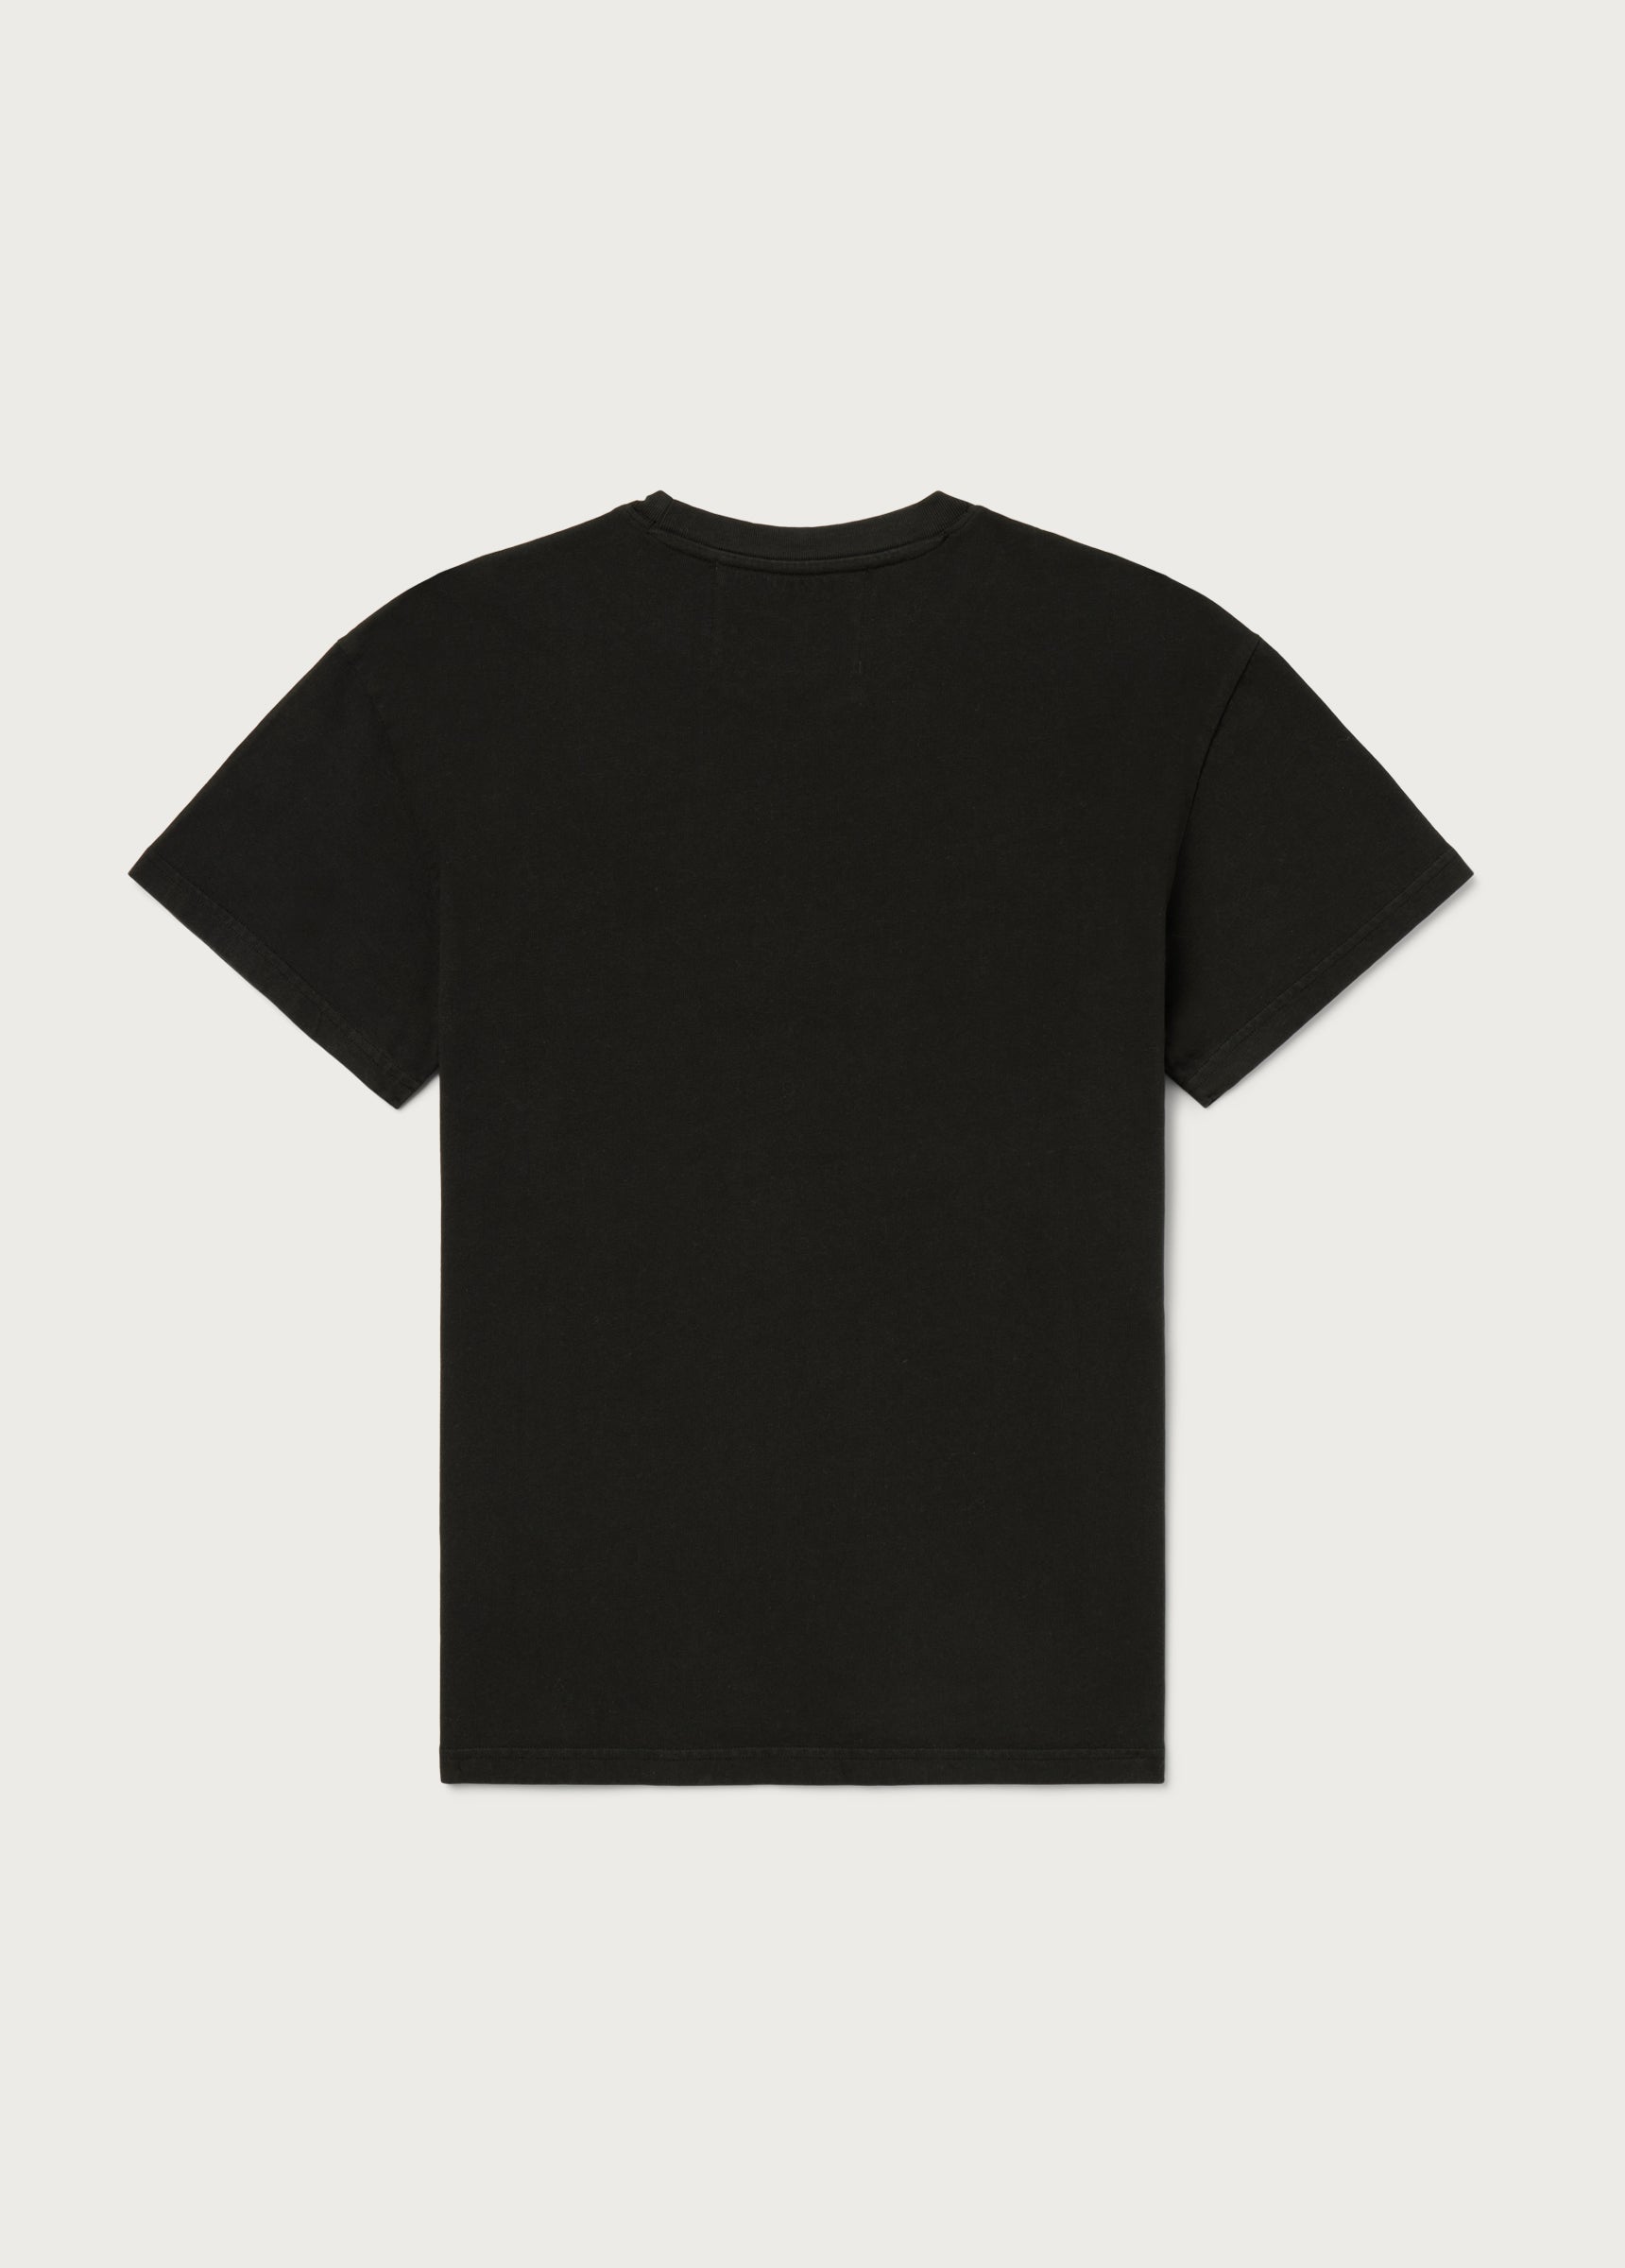 Woolrich Graphic Tee in Washed Black